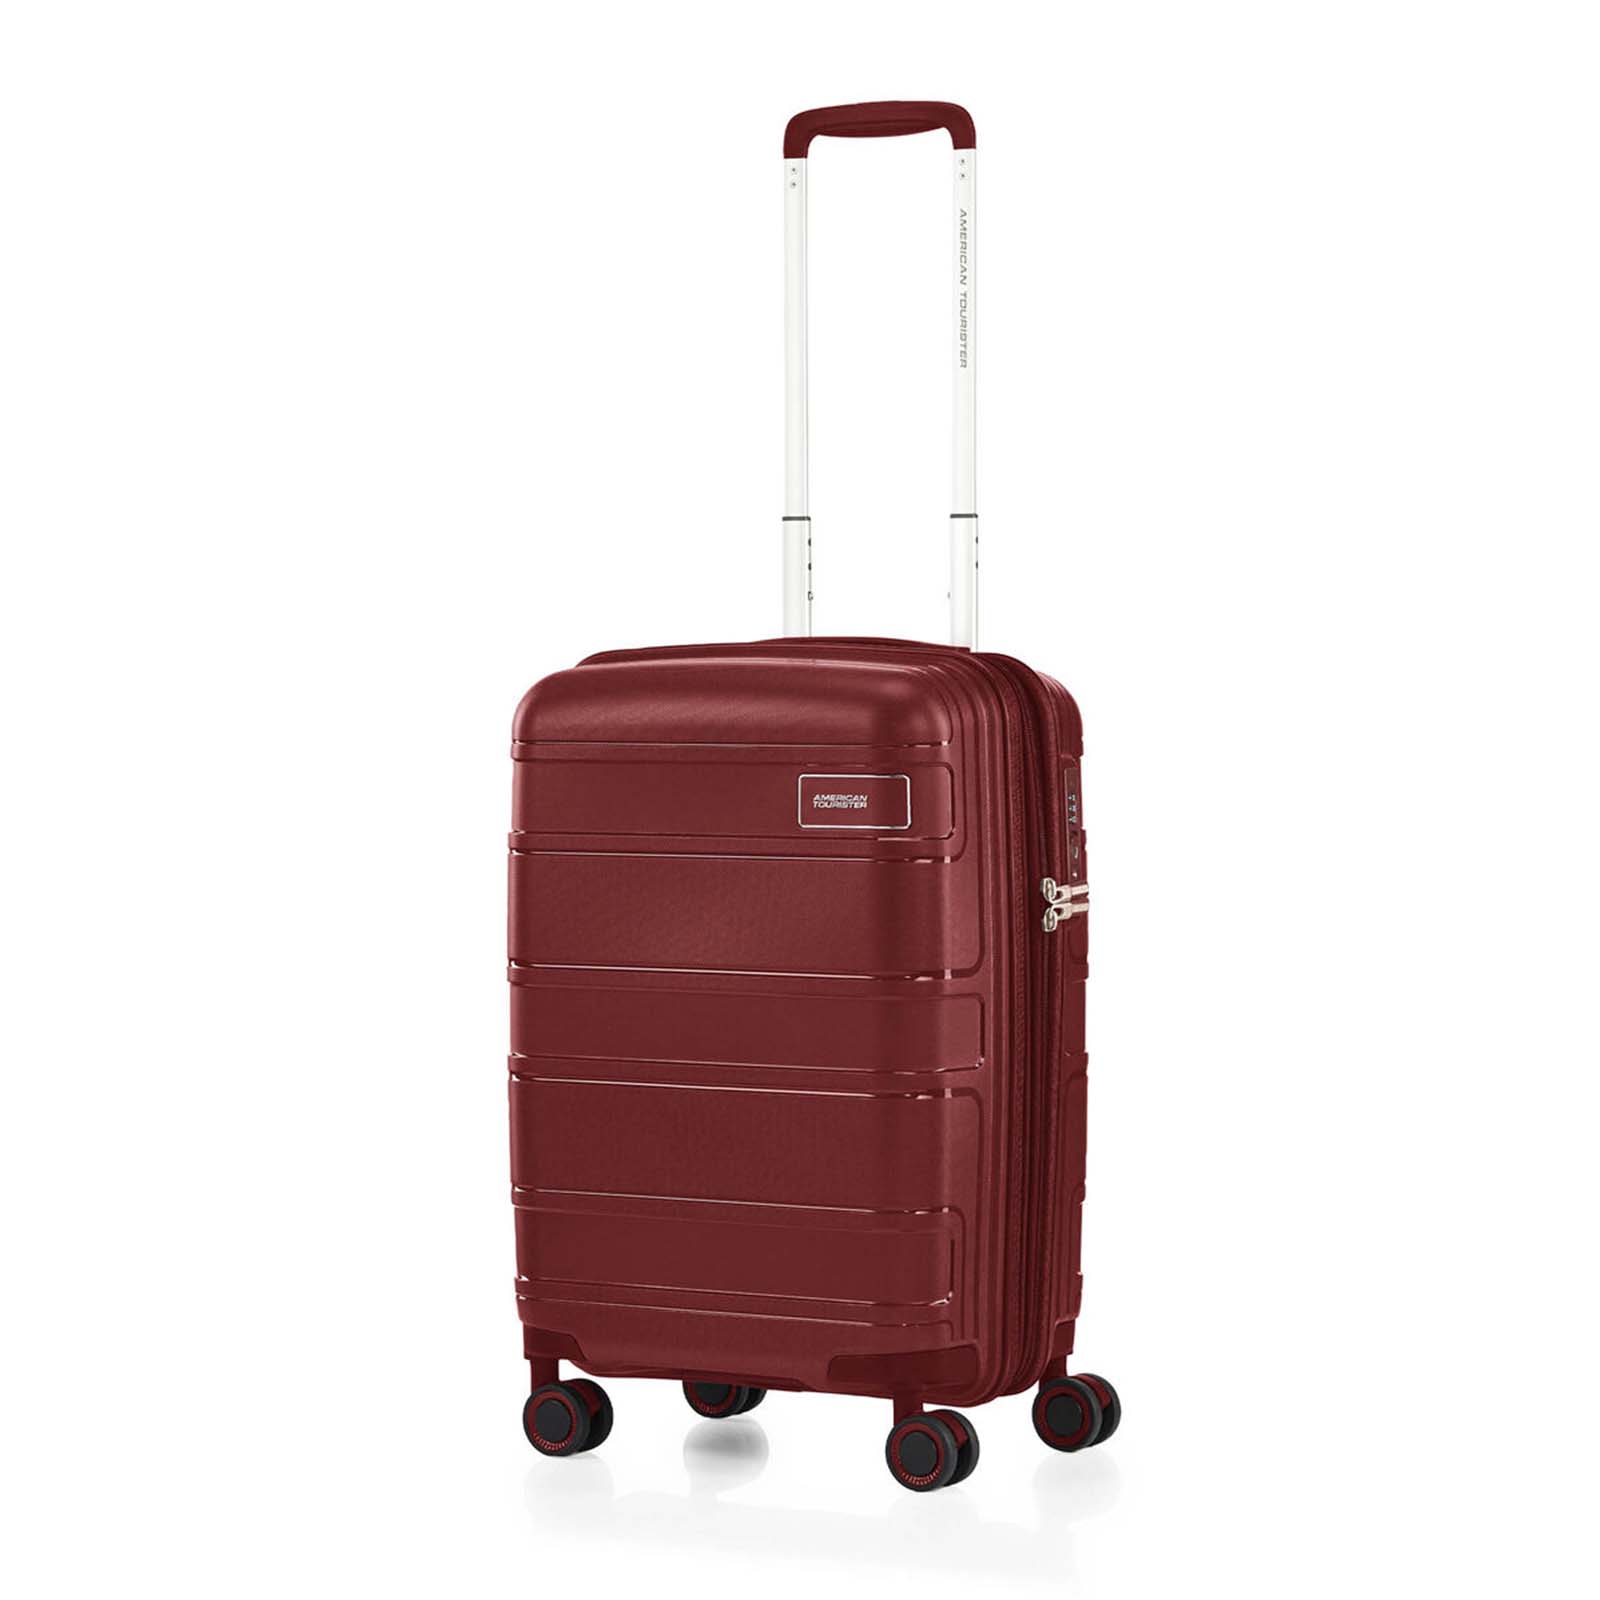 American-Tourister-Light-Max-55cm-Carry-On-Suitcase-Dahlia-Front-Angle